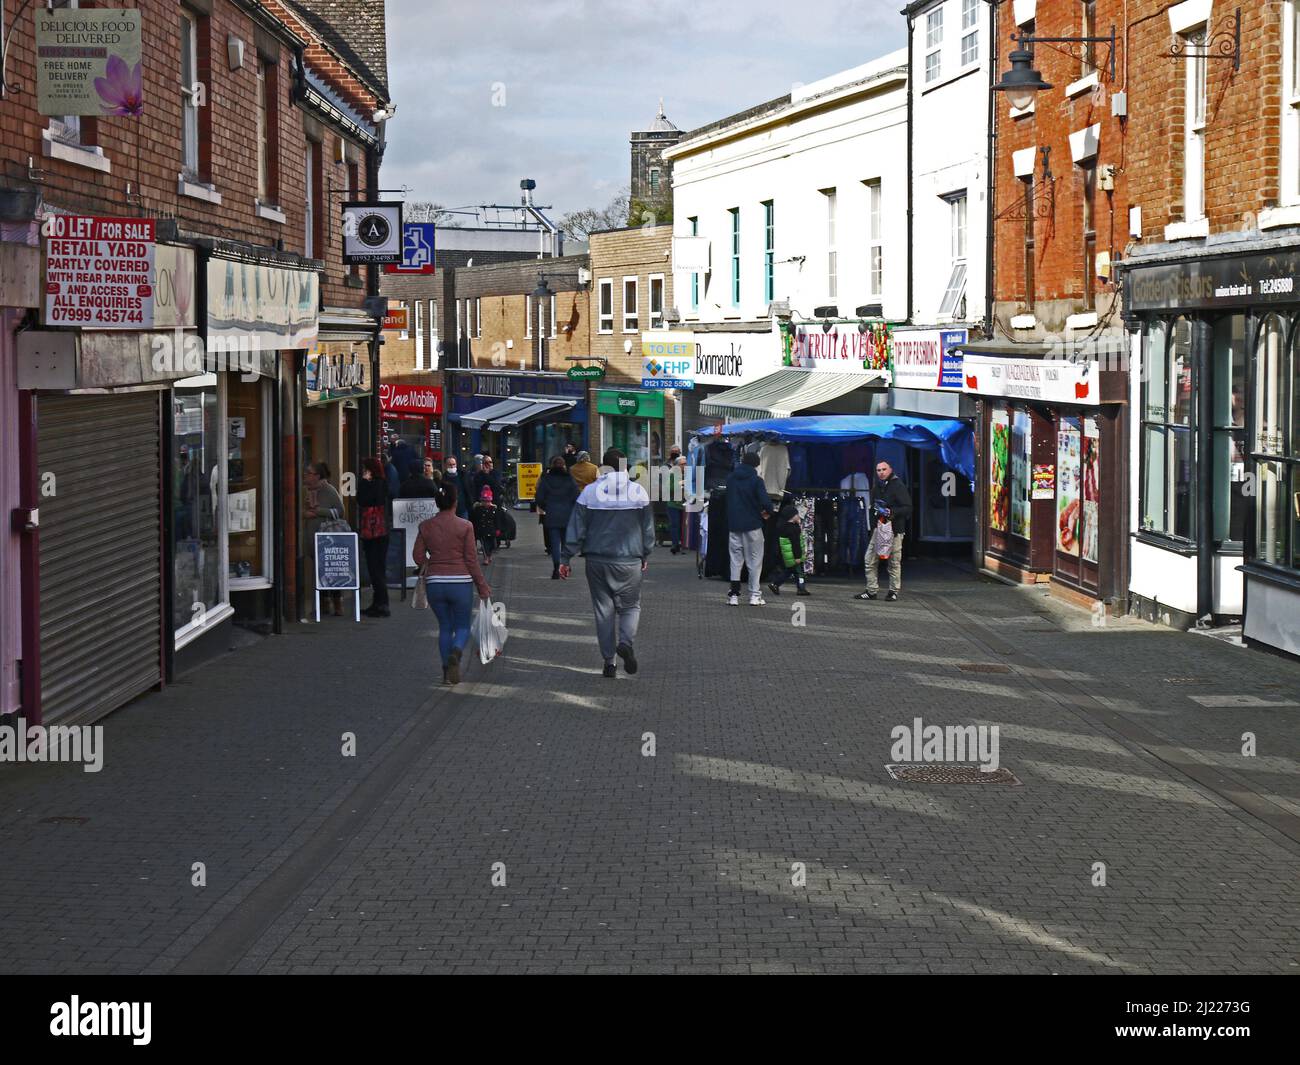 WELLINGTON. SHROPSHIRE. ENGLAND. 02-26-22. New Street. Shops with outdoor displays in the pedestrianized town centre. Stock Photo